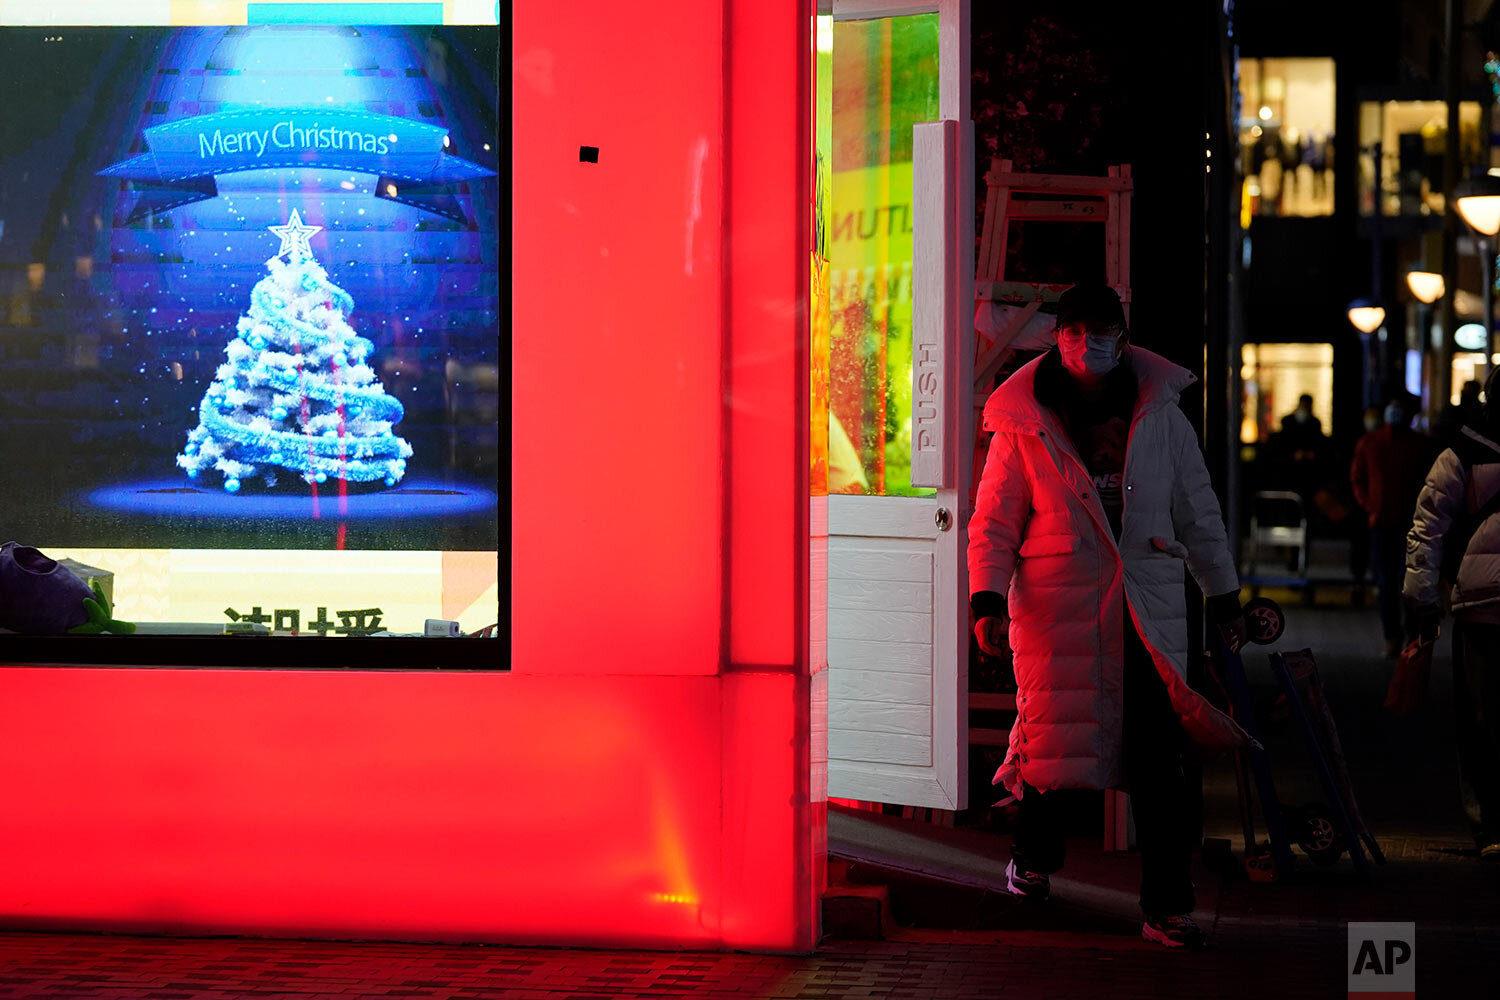  A visitor walks by Christmas decorations at a mall in Beijing, Thursday, Dec. 24, 2020. (AP Photo/Ng Han Guan) 